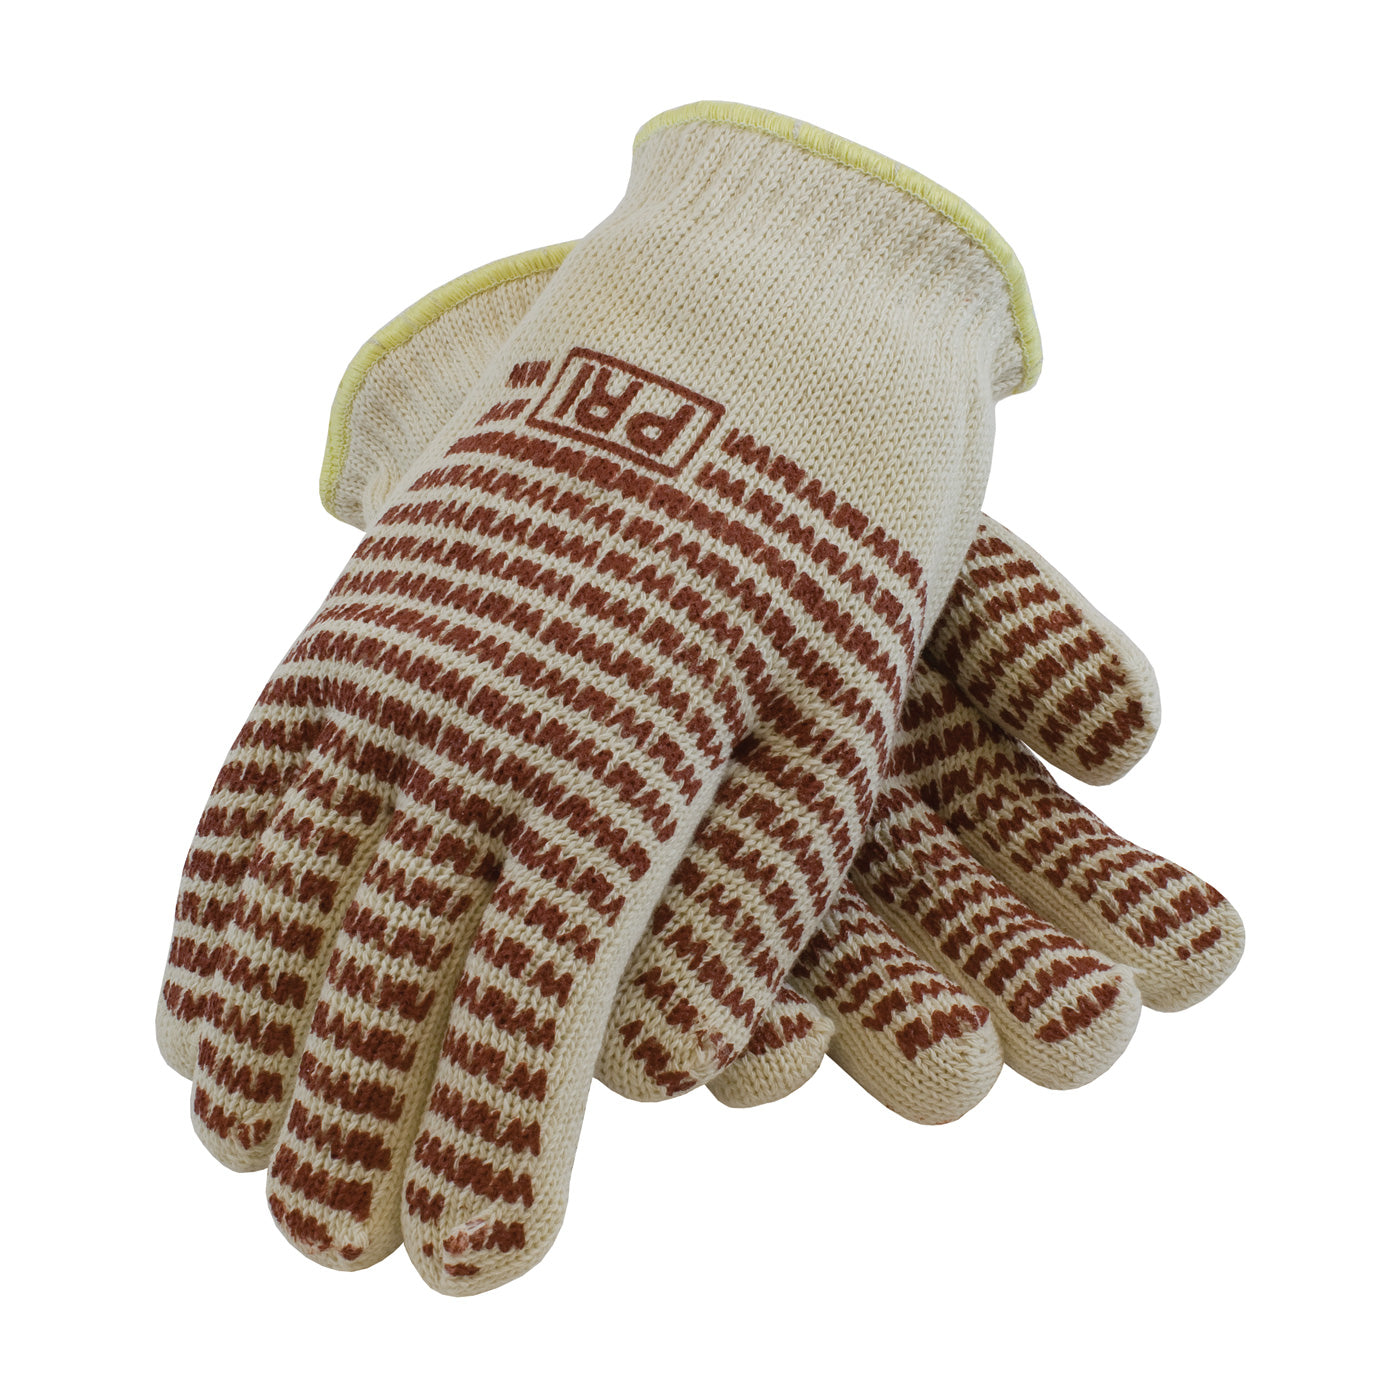 PIP 43-502L Double-Layered Cotton Seamless Knit Hot Mill Glove with Double-Sided EverGrip Nitrile Coating - 24 oz